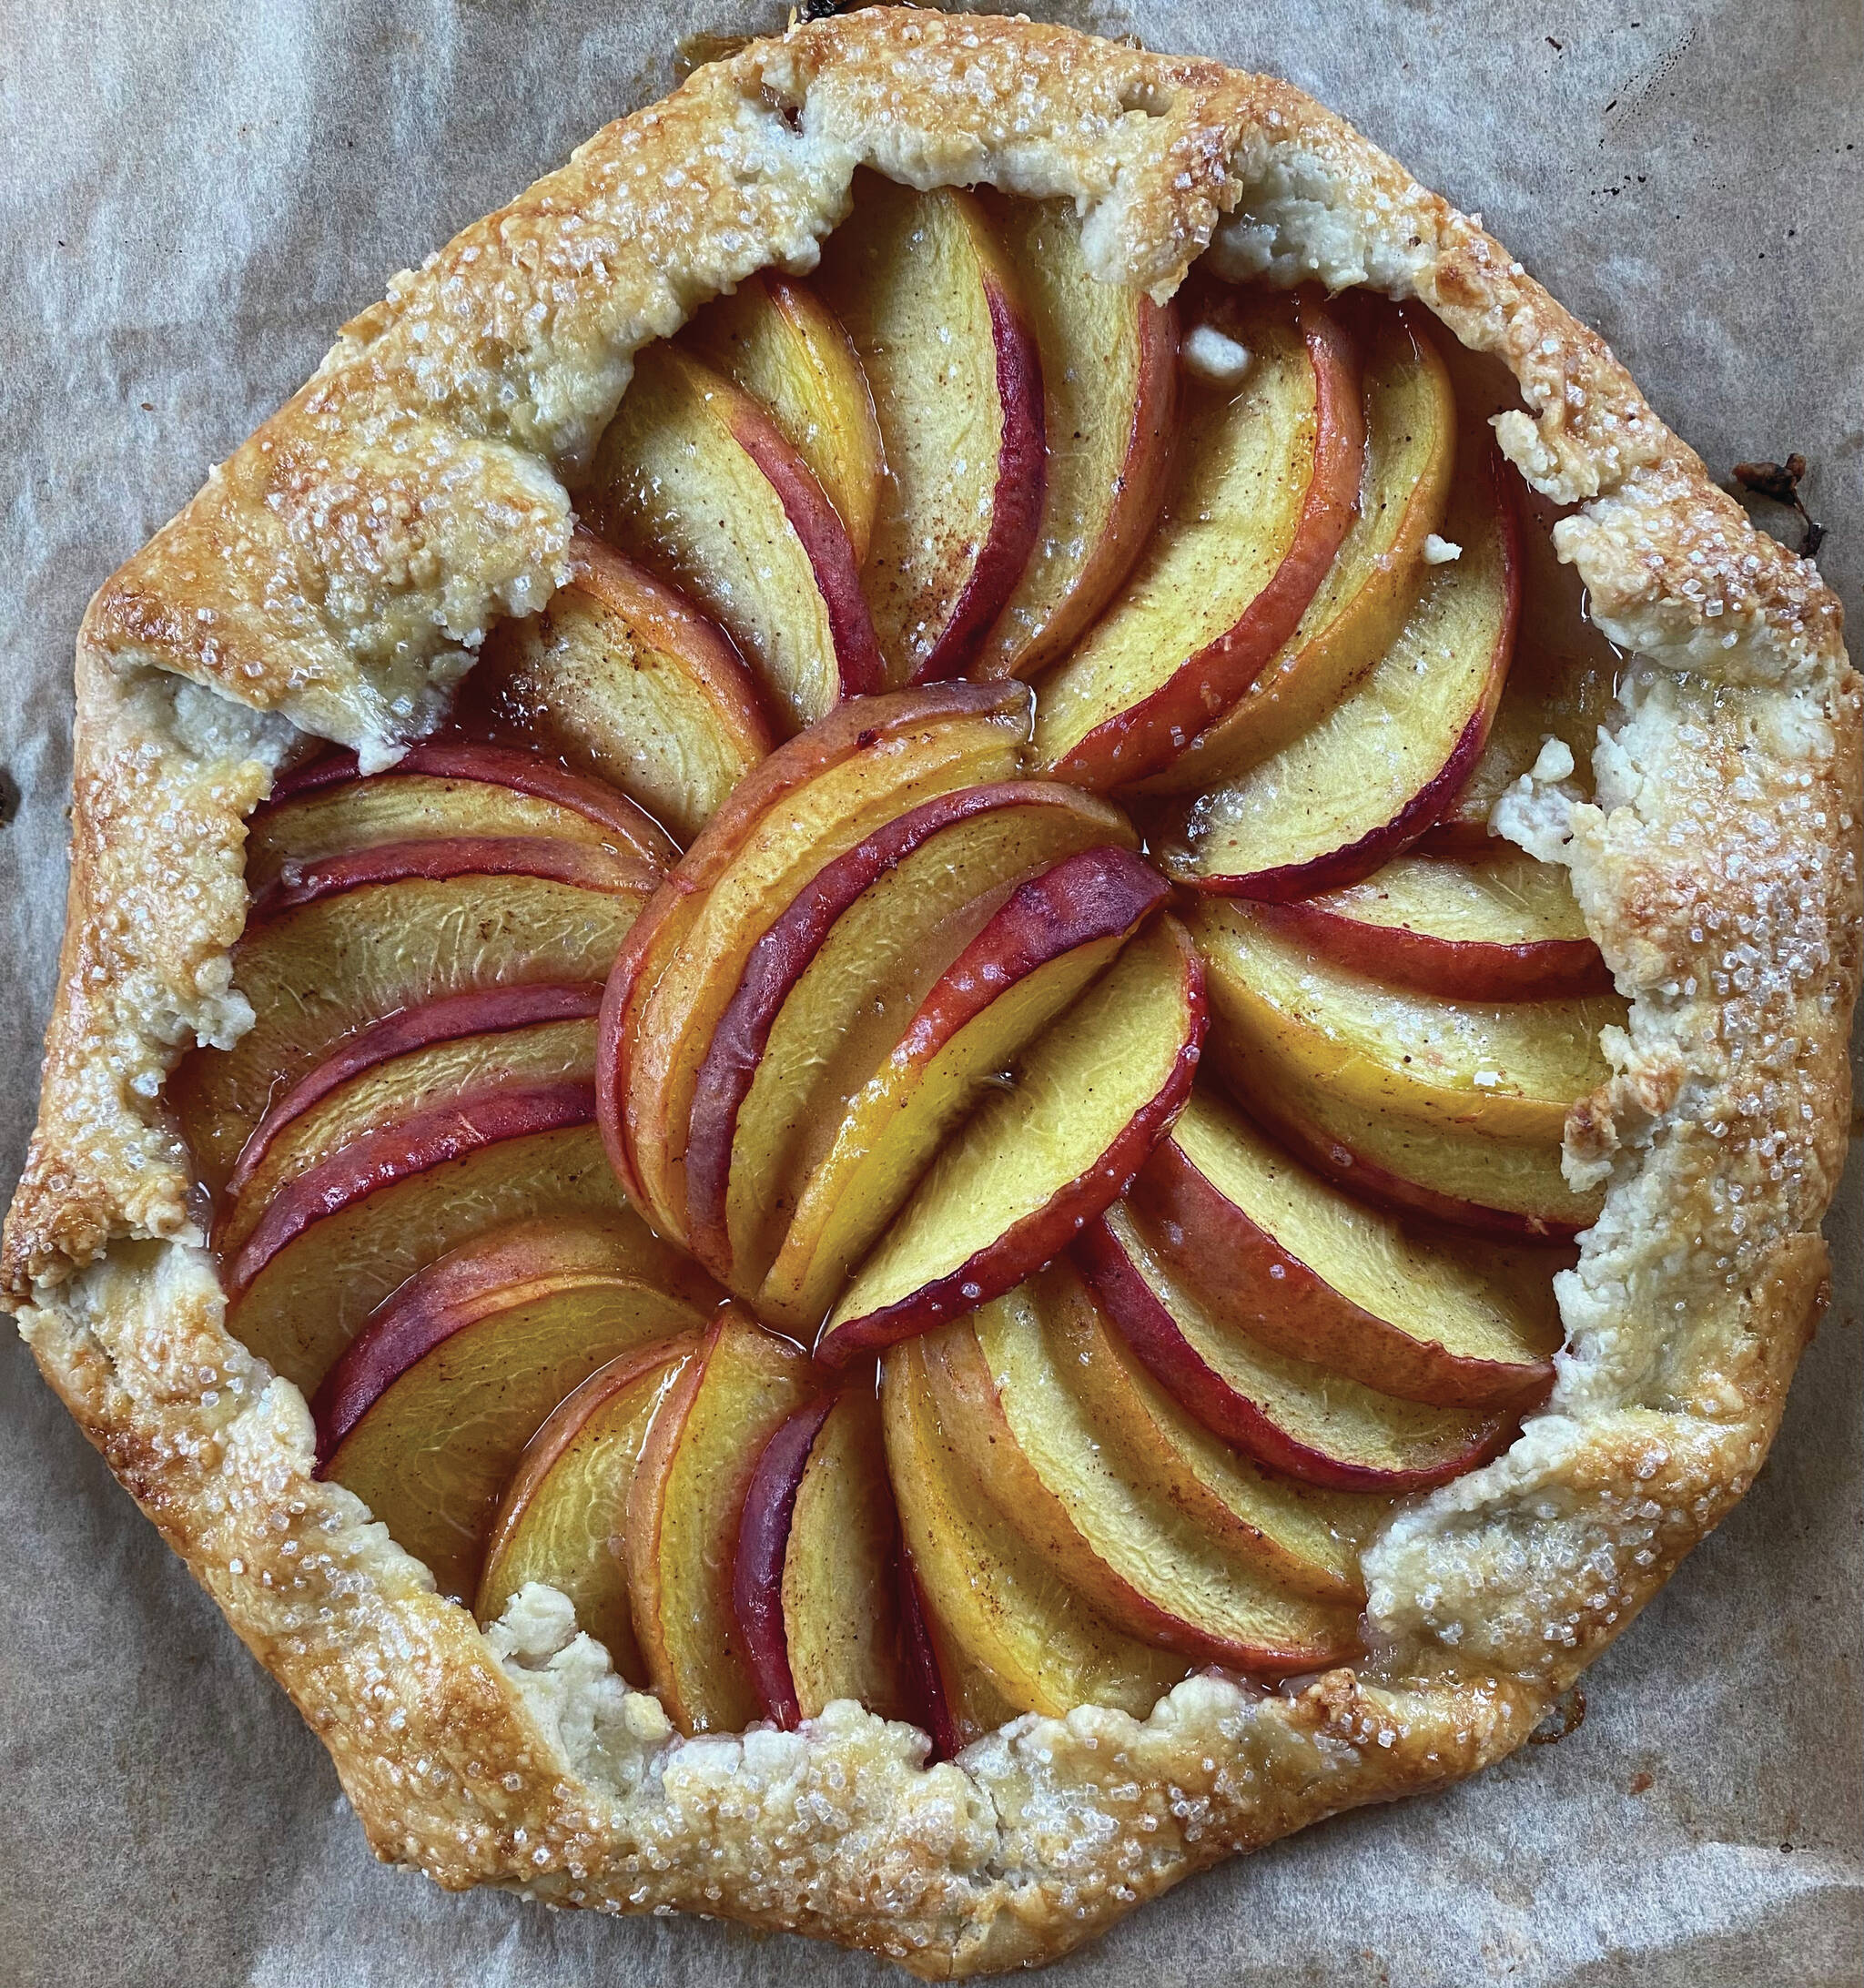 Photo by Tressa Dale/Peninsula Clarion
Fresh ripe peaches are wrapped in a buttery crust in this peach galette recipe.